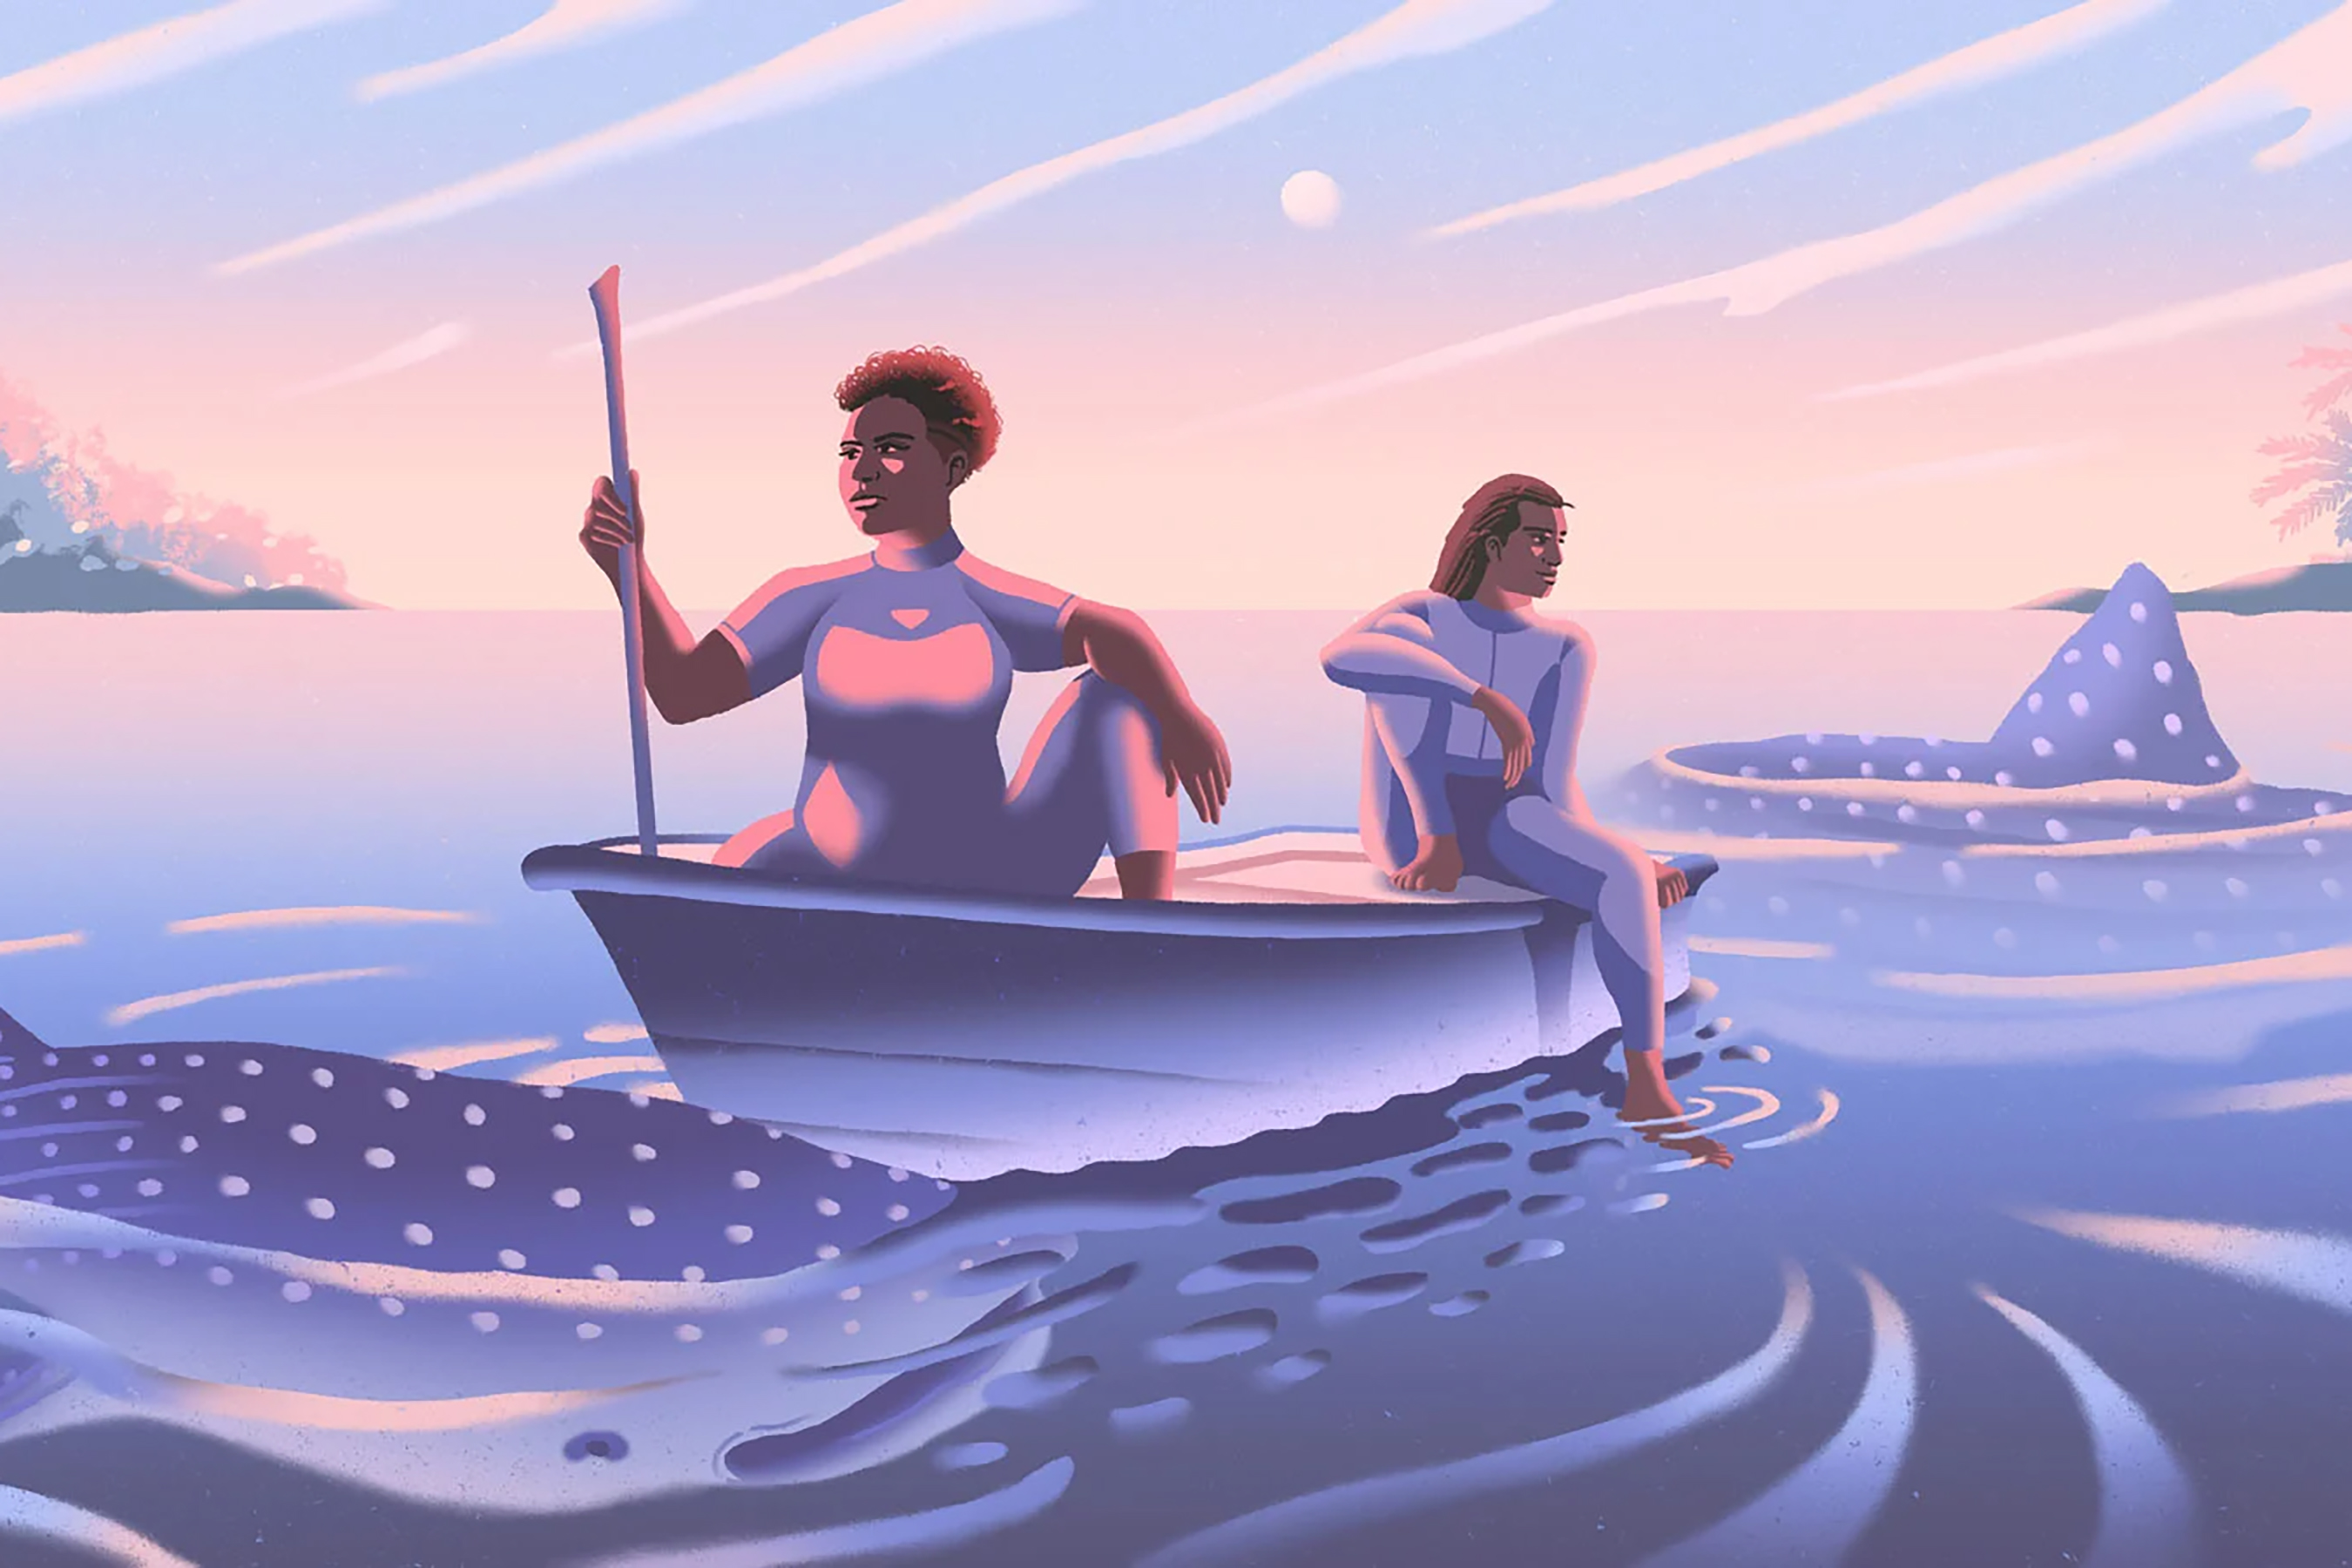 An illustration of two people sitting on a boat in shark-infested waters in the Hawaiian ocean by Mikyung Lee